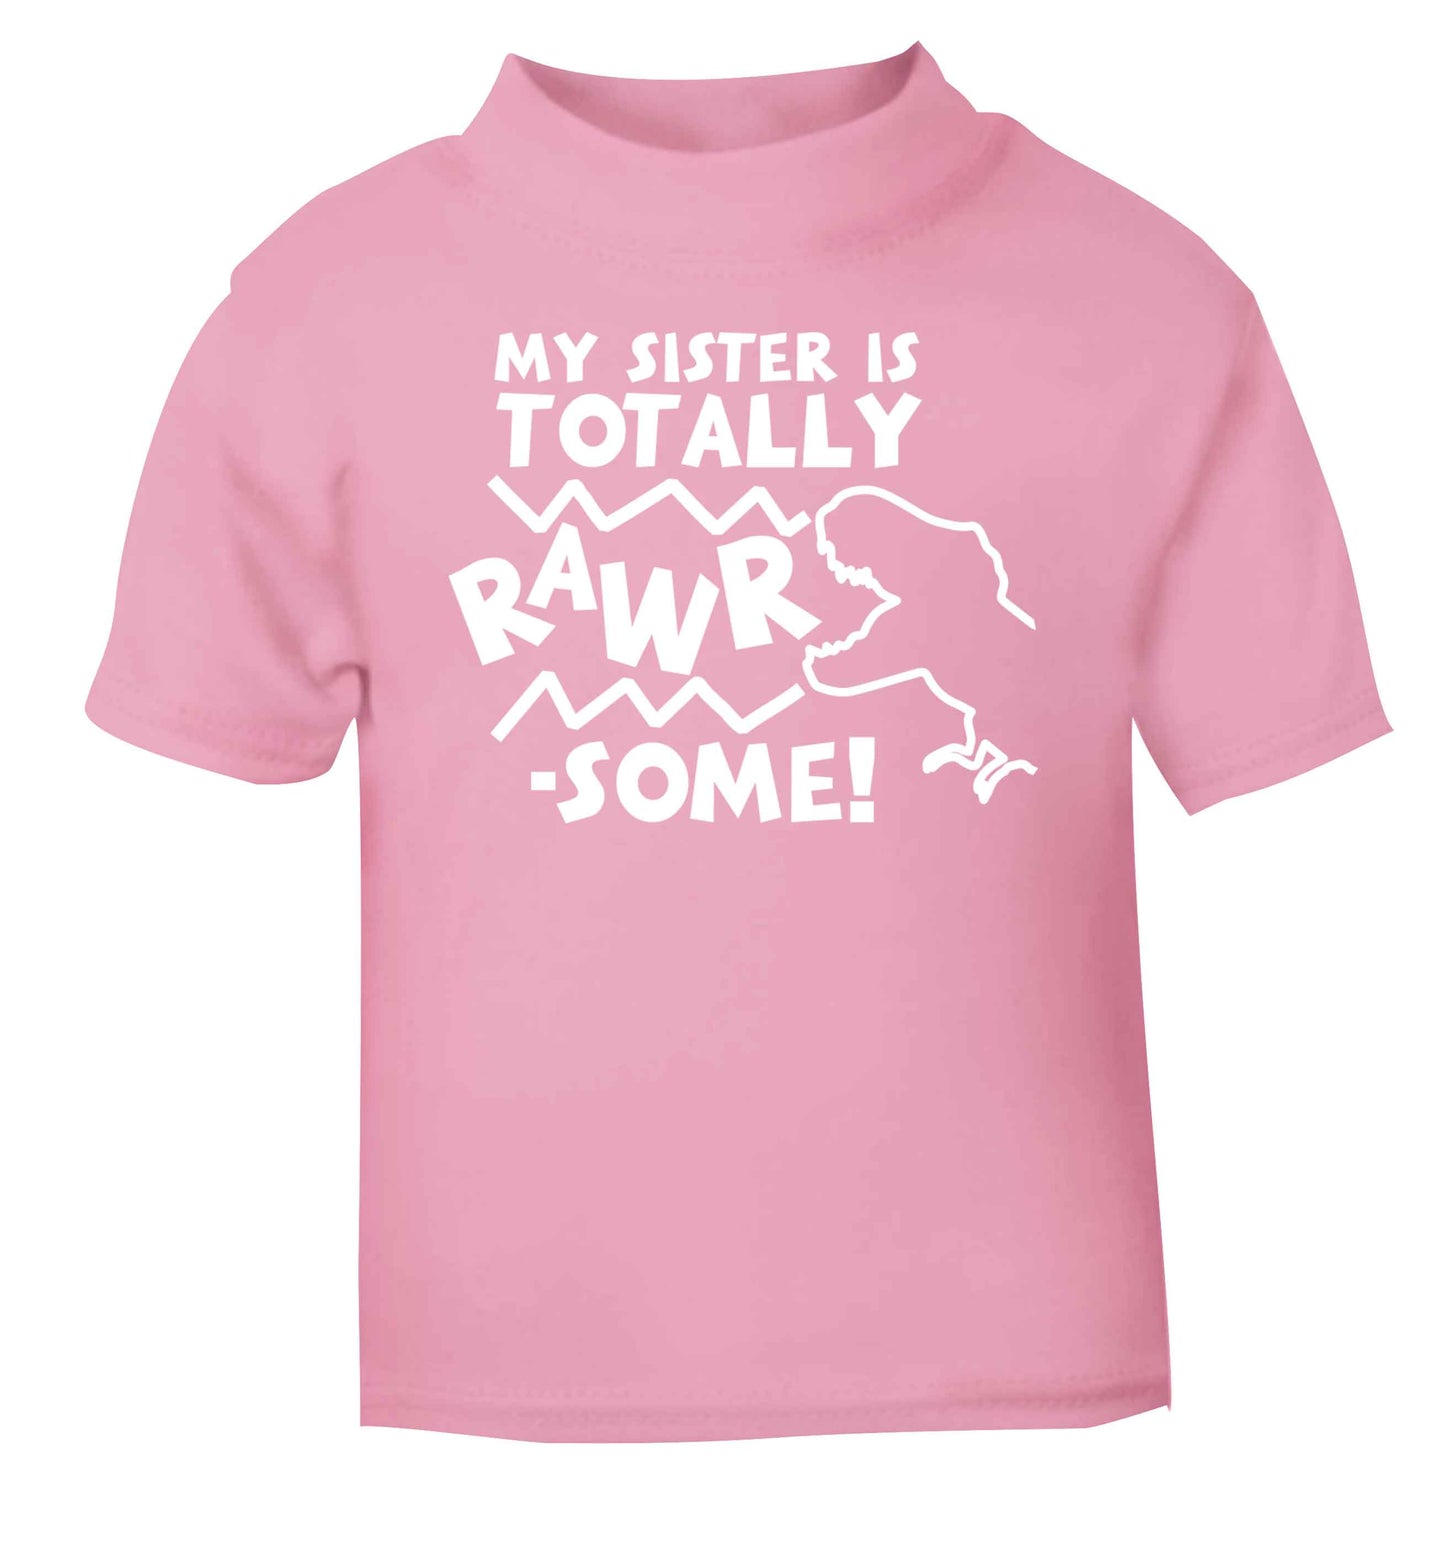 My sister is totally rawrsome light pink baby toddler Tshirt 2 Years